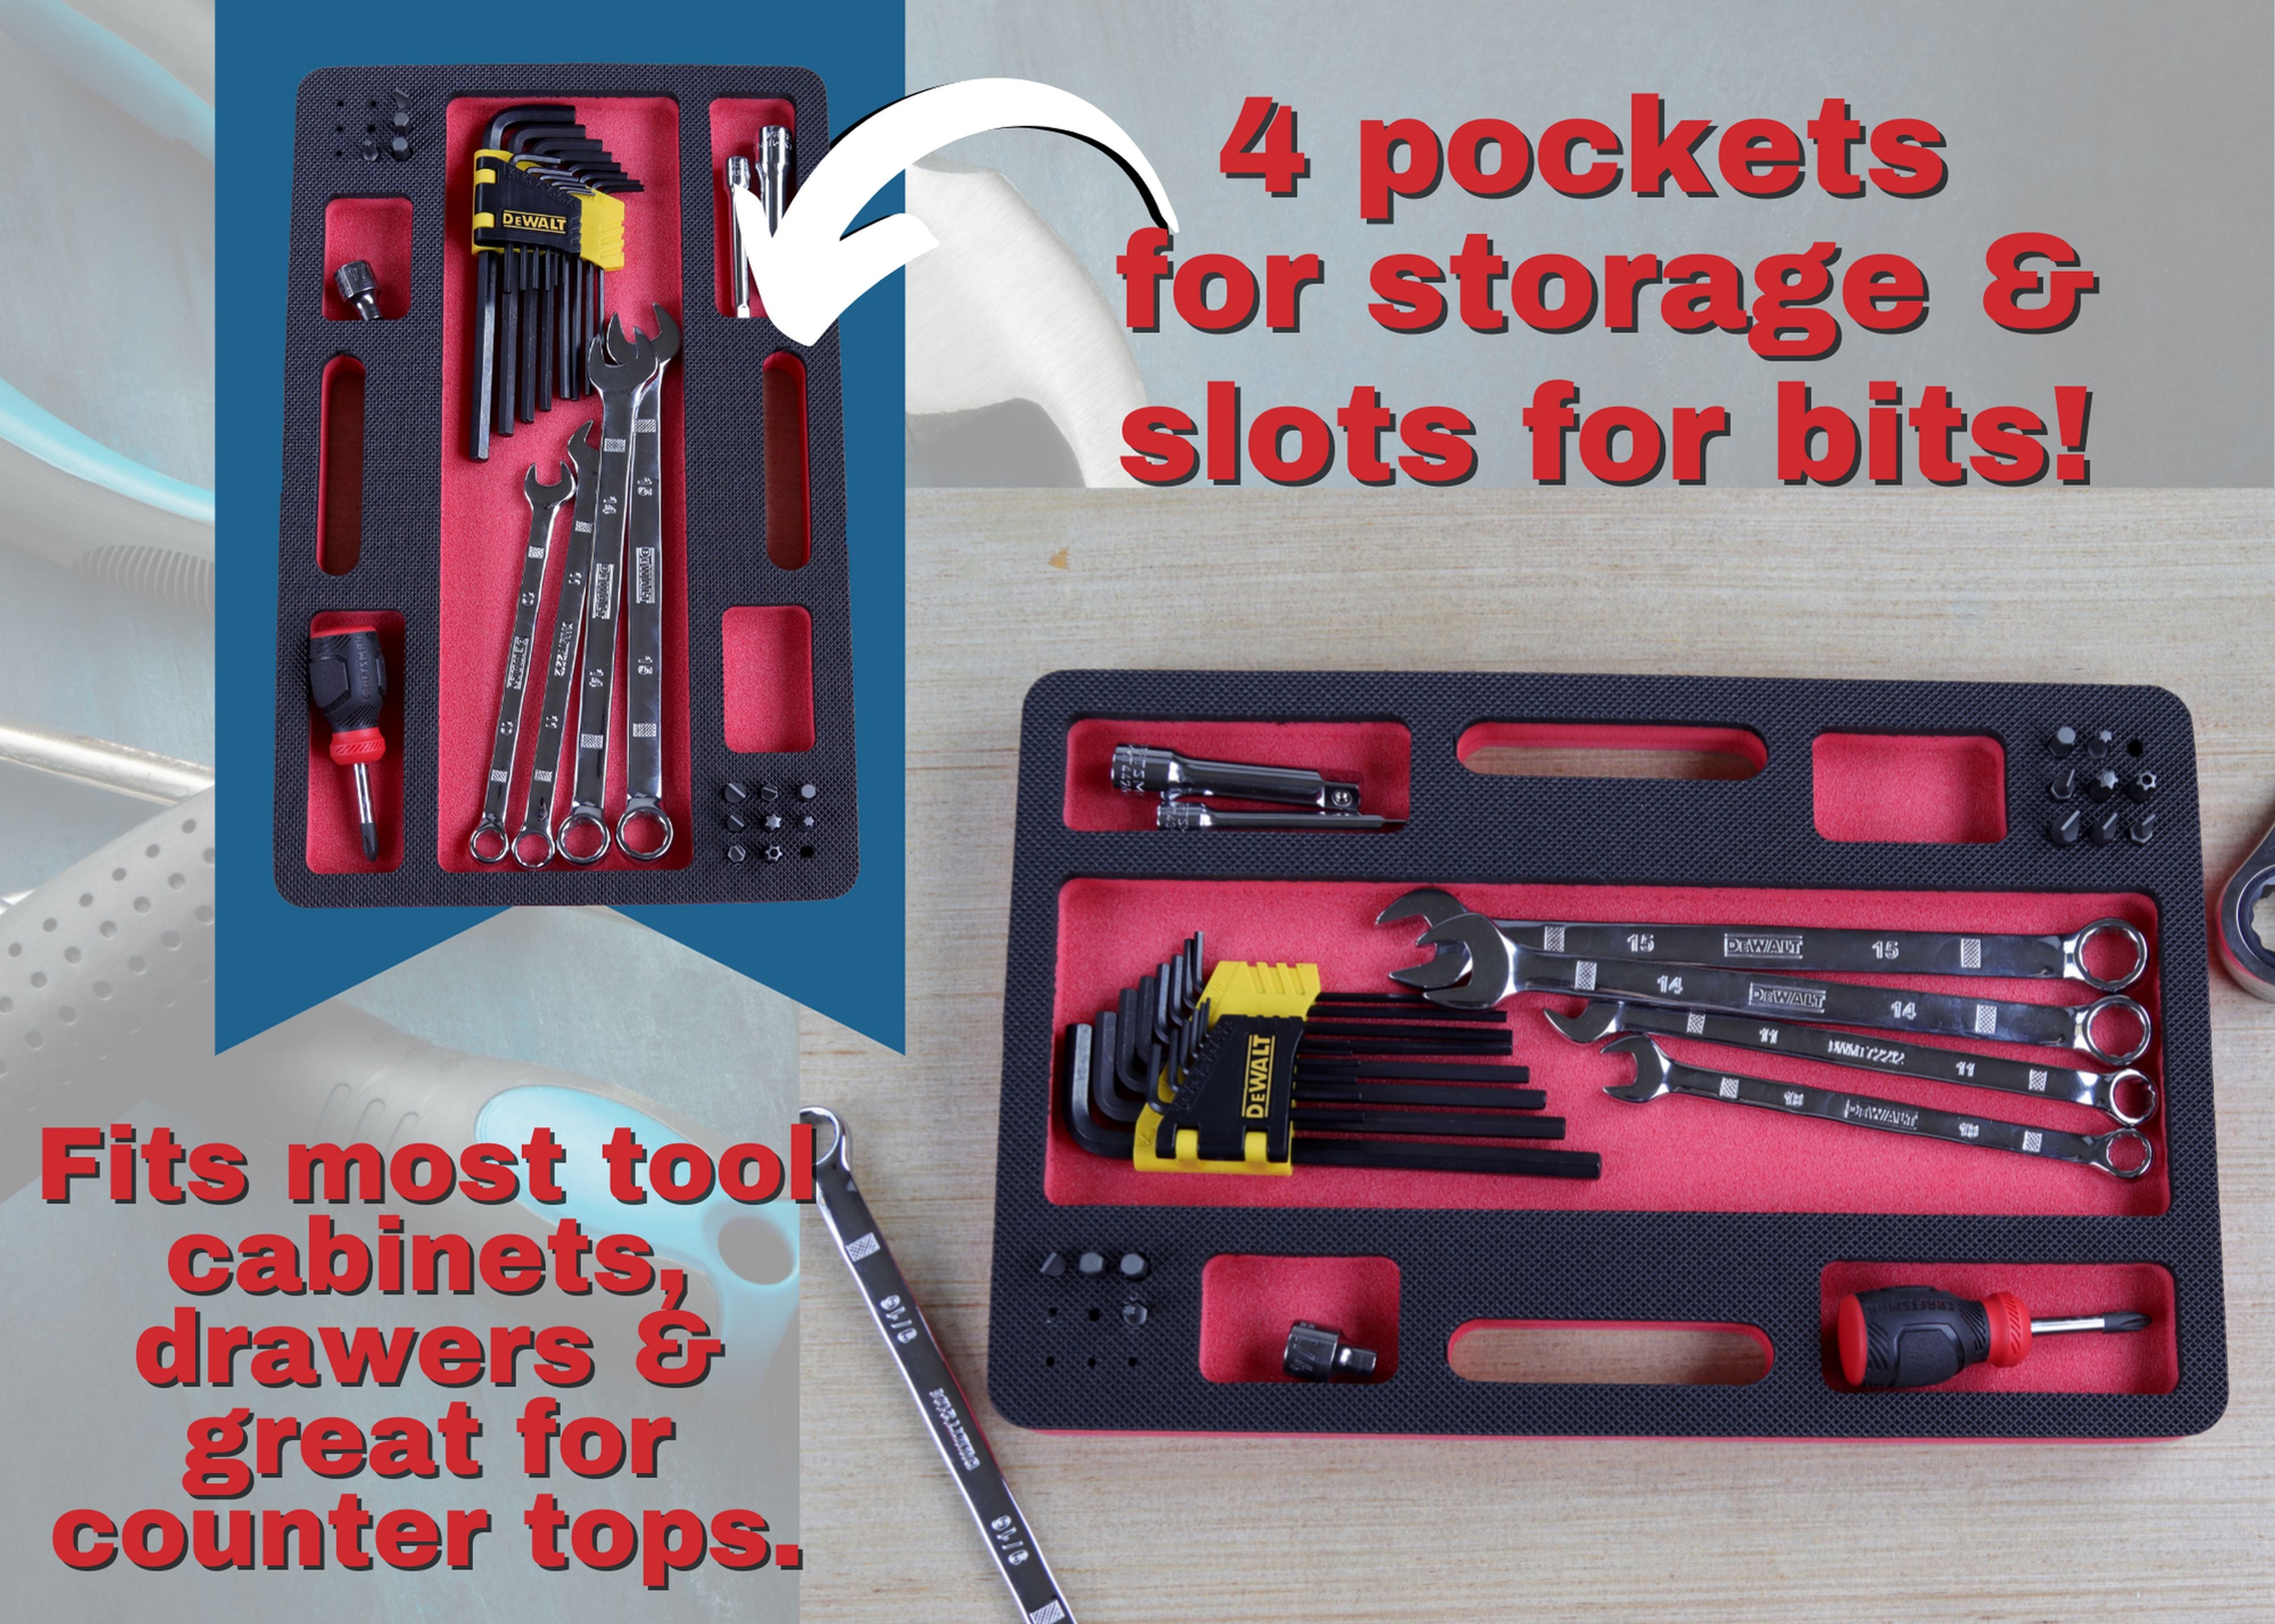 Tool Work Tray Organizer Red and Black Durable Foam Non-Slip Anti-Rattle Bin Holder Drawer Insert with Handles 5 Pockets with Bit Holes Portable Home Work Garage 14 x 9 Inches